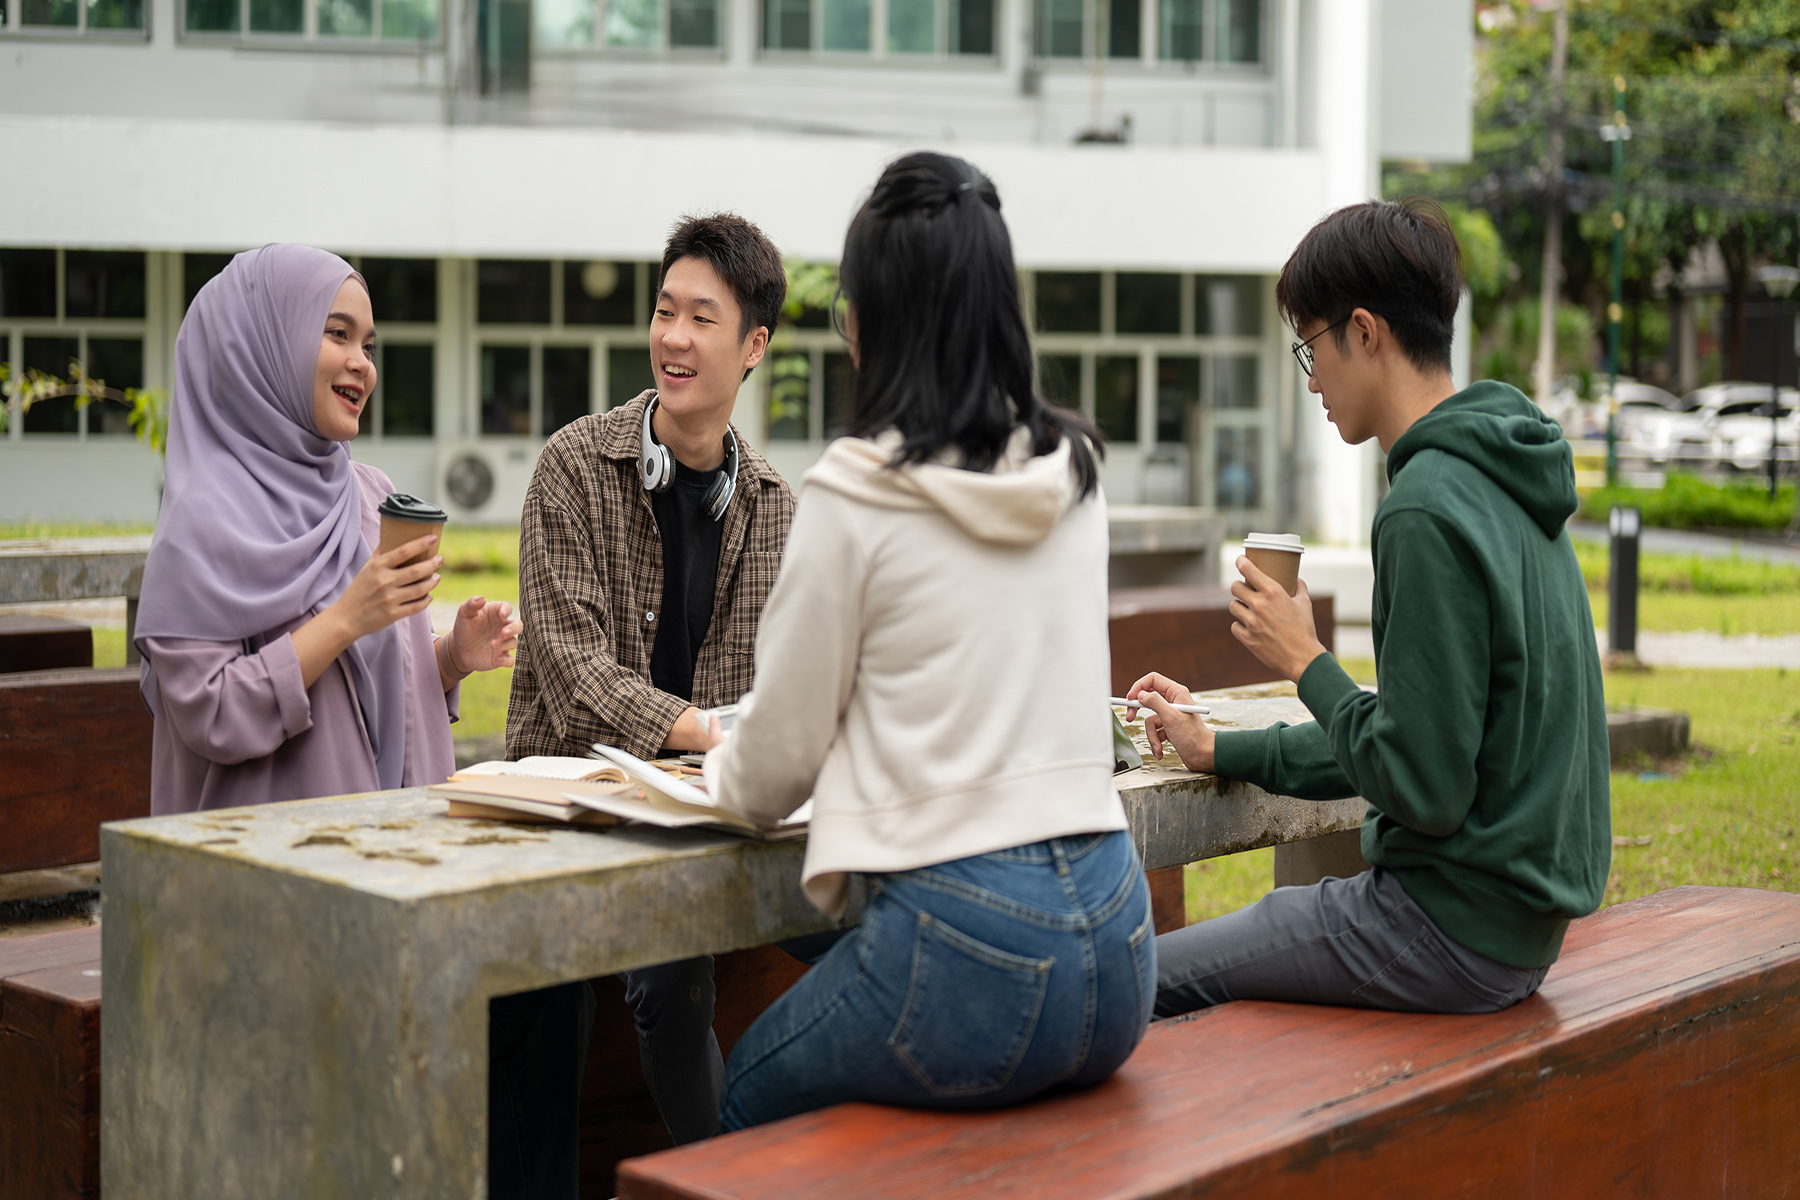 Four students sit on at a table outside and chat and laugh